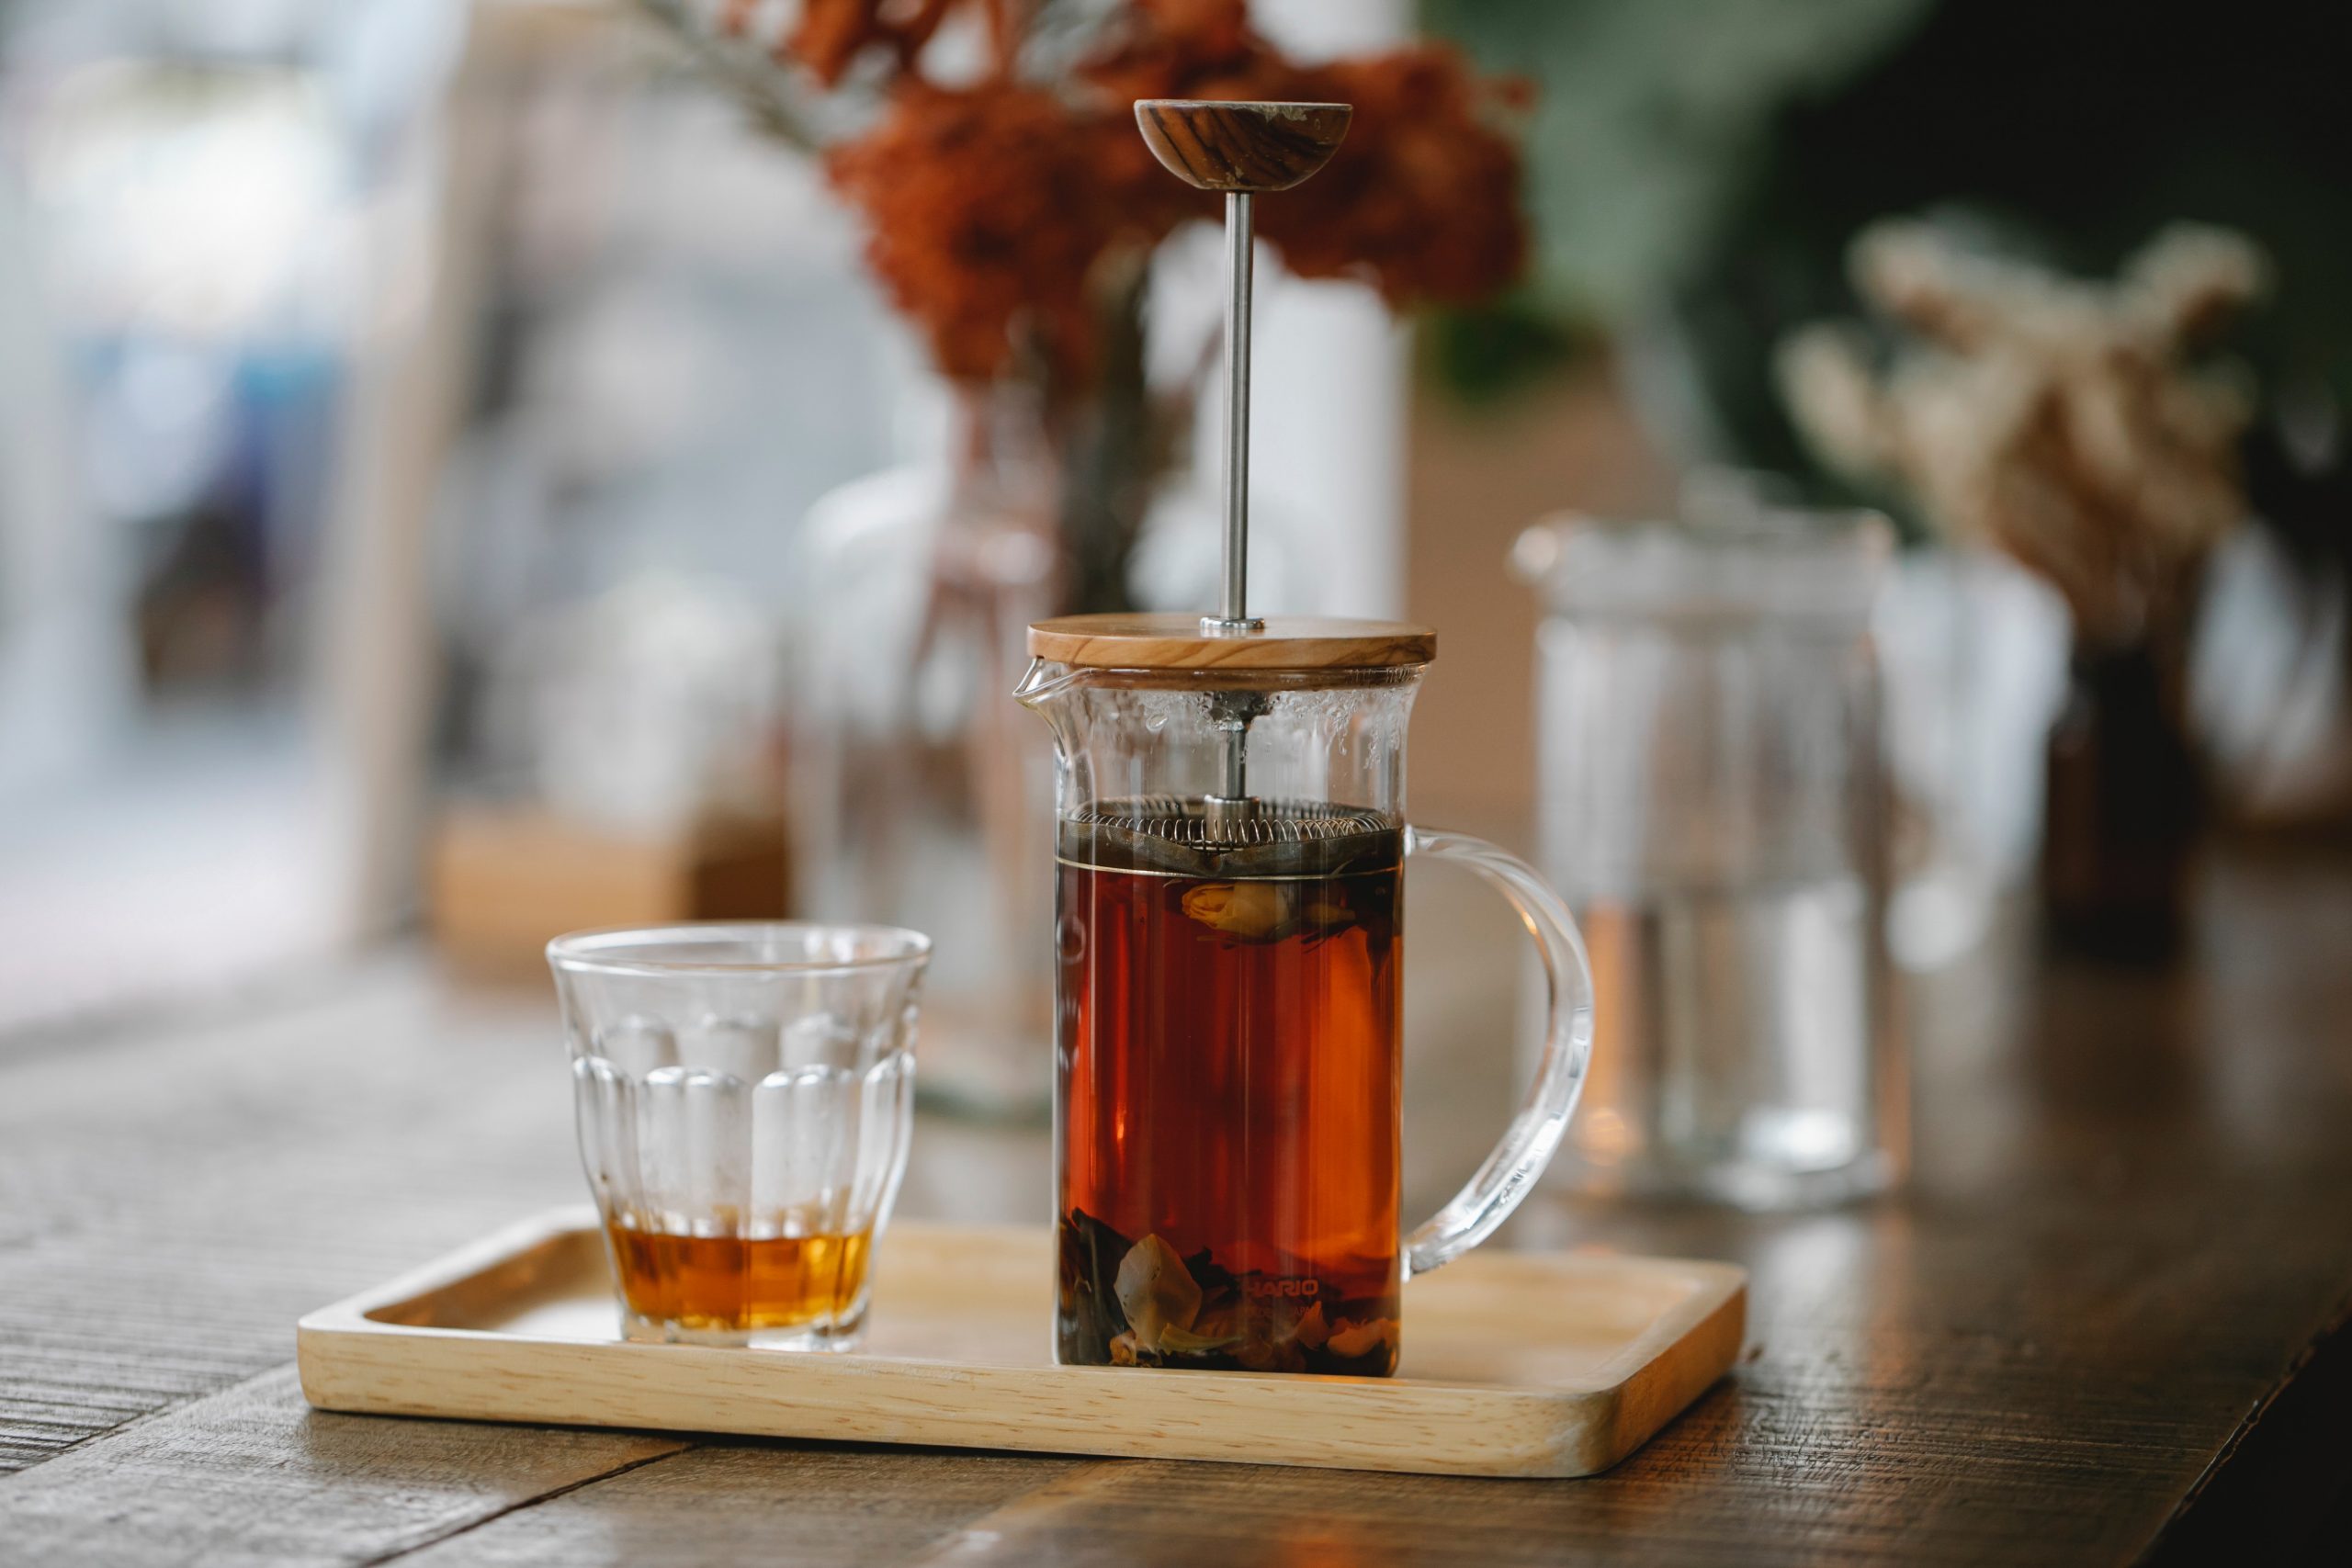 Hot herbal tea brewing in French press